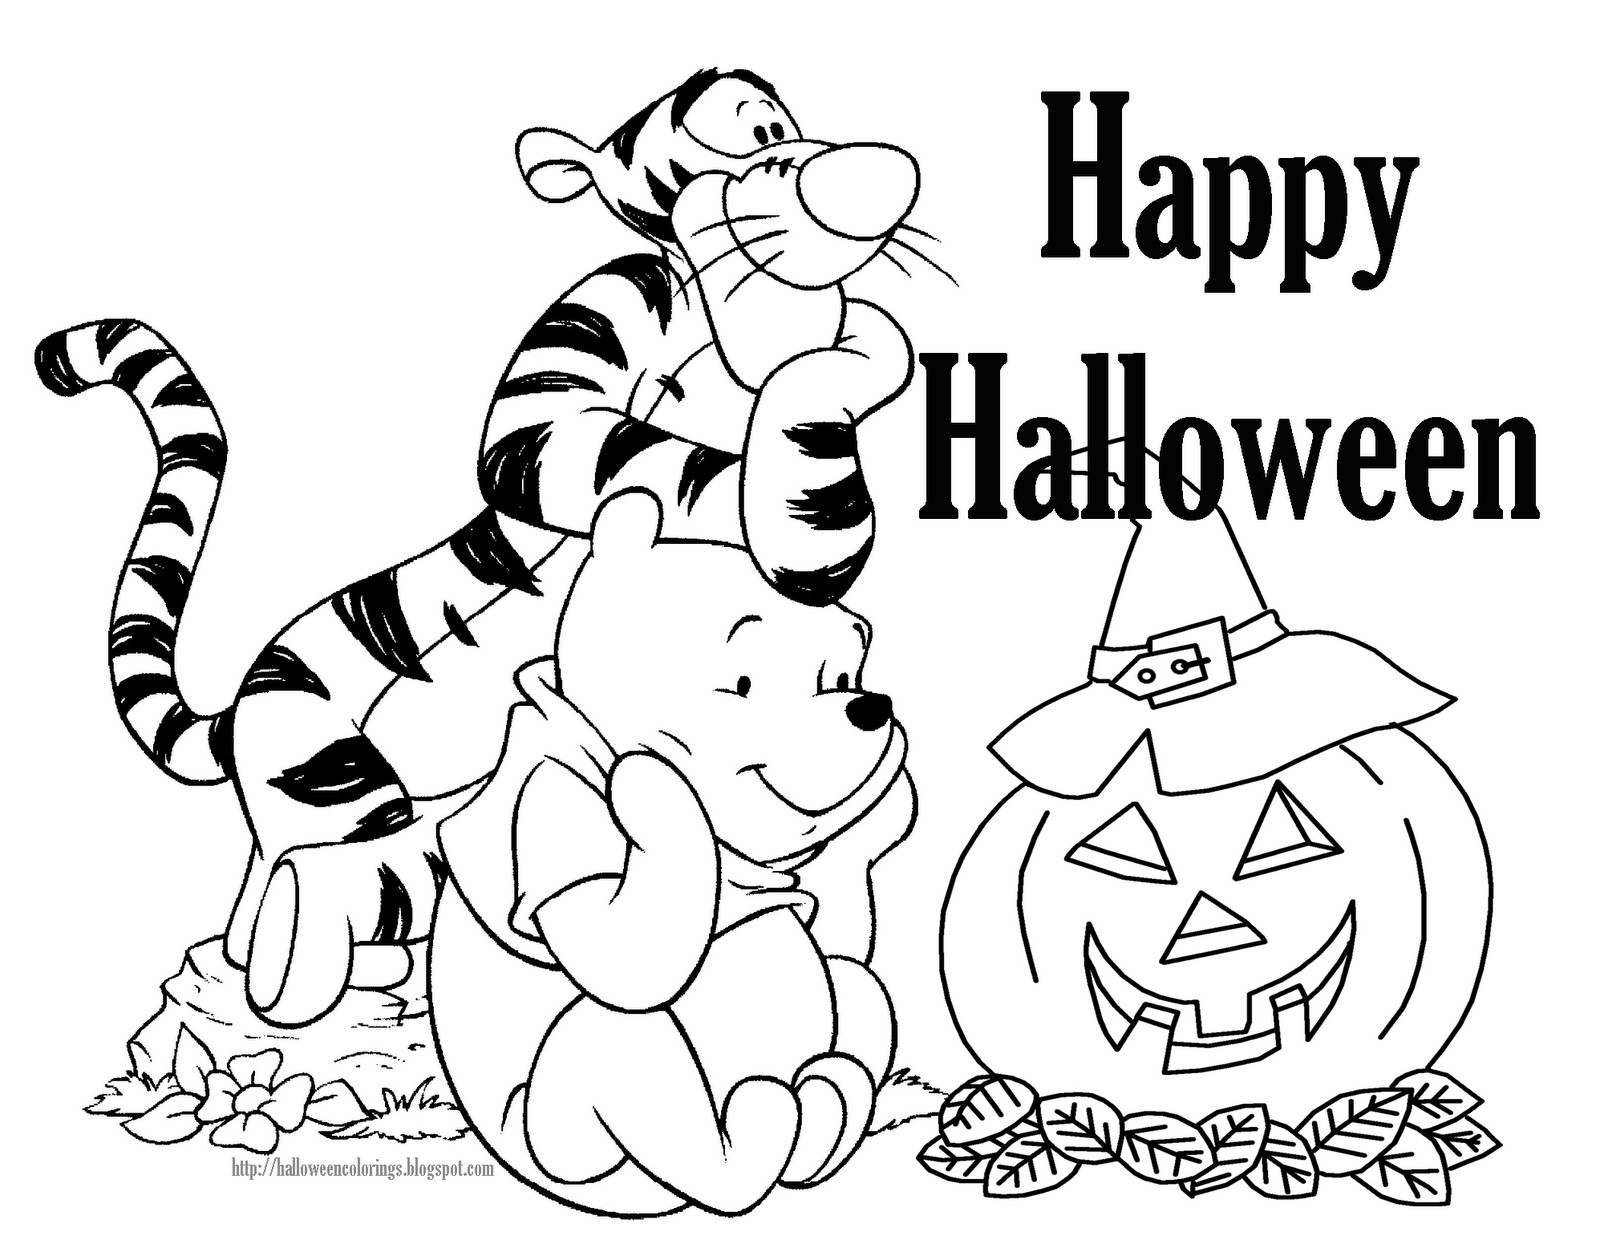 Halloween Coloring Pages Free Printable
 Halloween Coloring Pages – Free Printable Minnesota Miranda